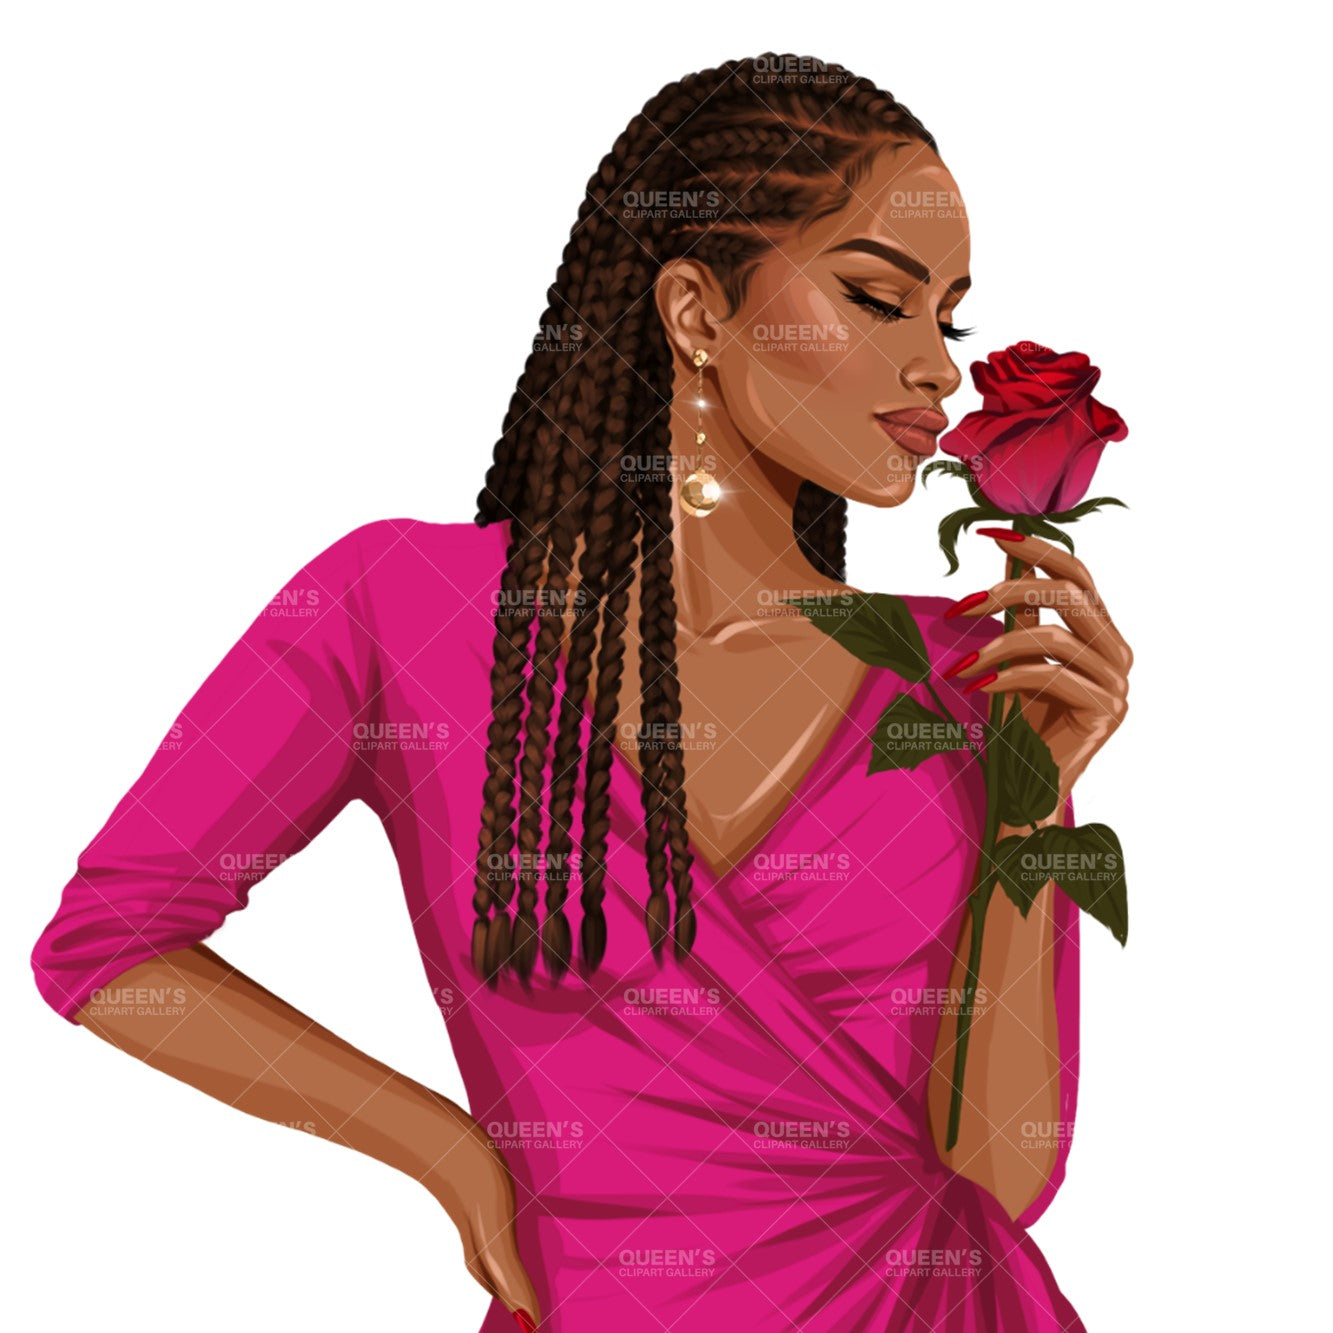 Valentine's Day rose, Afro woman in red dress, Valentine clipart, Fashion Illustration, Fashion girl png, Red rose, Love, Girl boss planner, Love